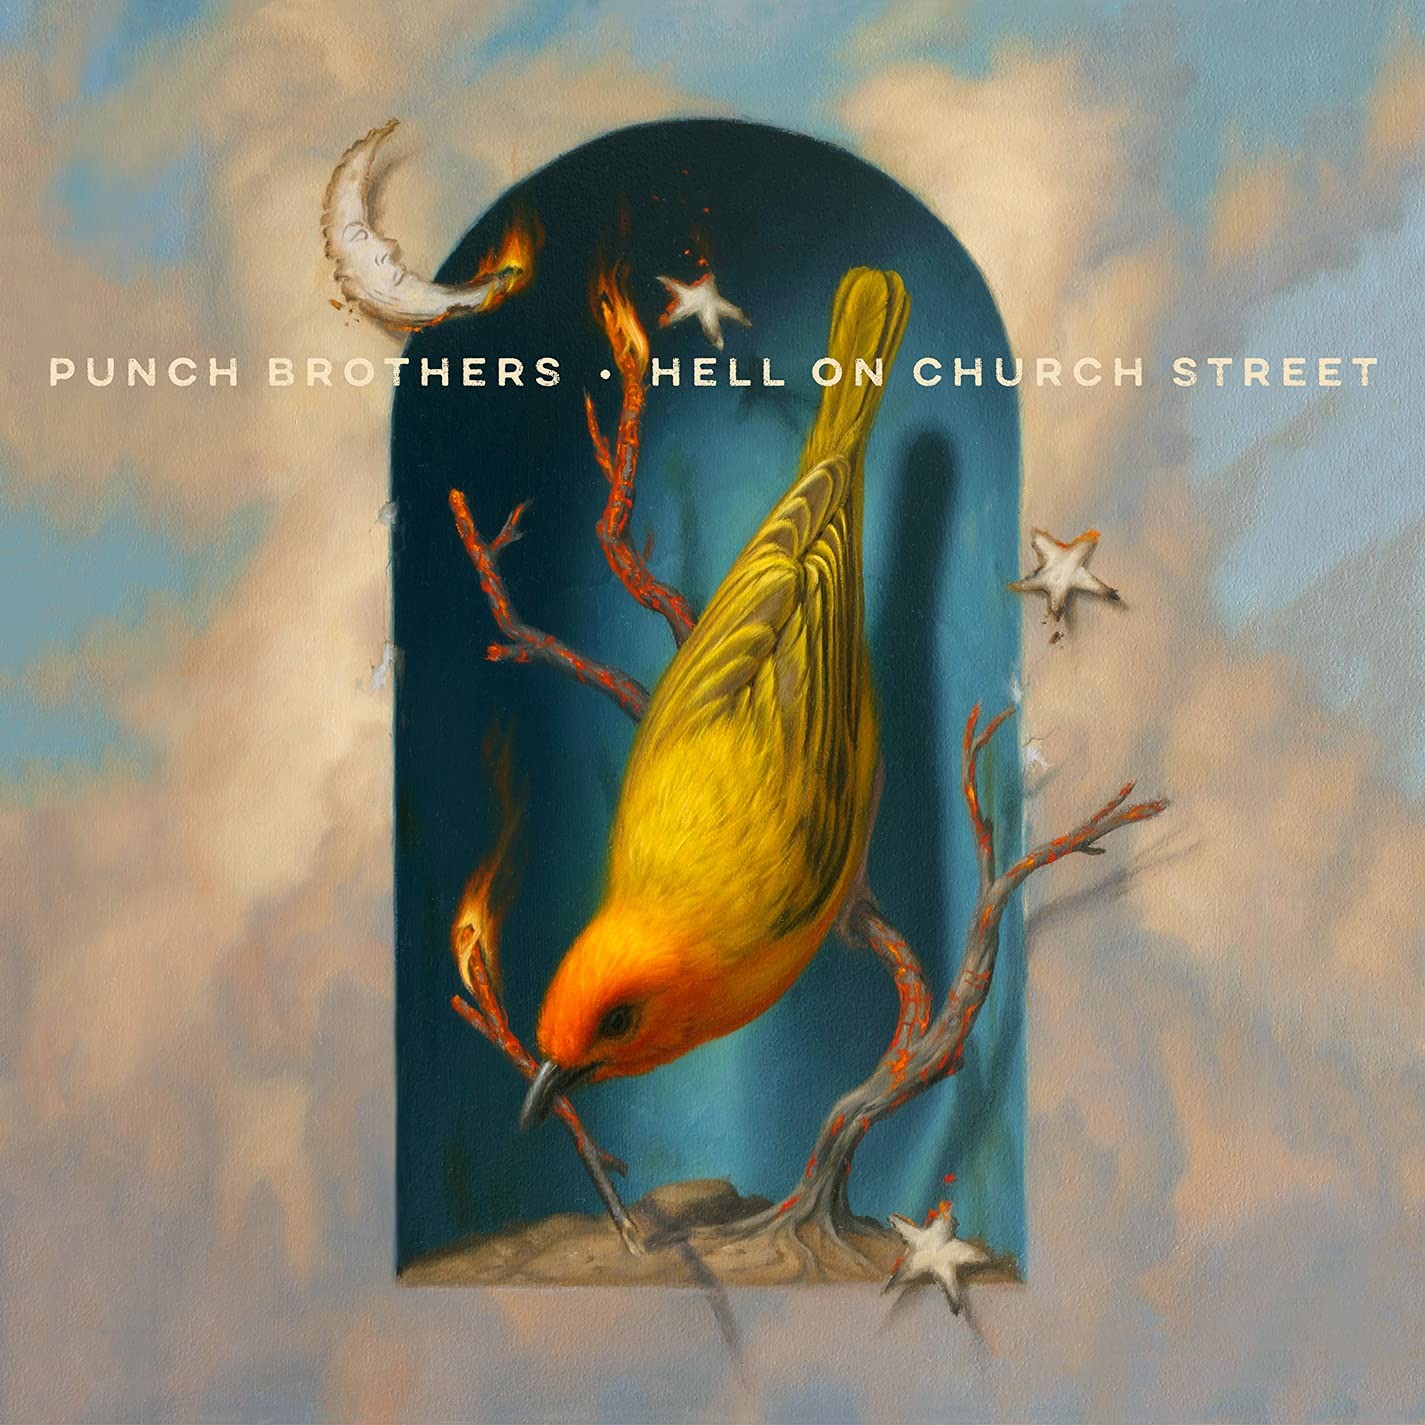 PUNCH BROTHERS - HELL ON CHURCH STREET, Vinyl